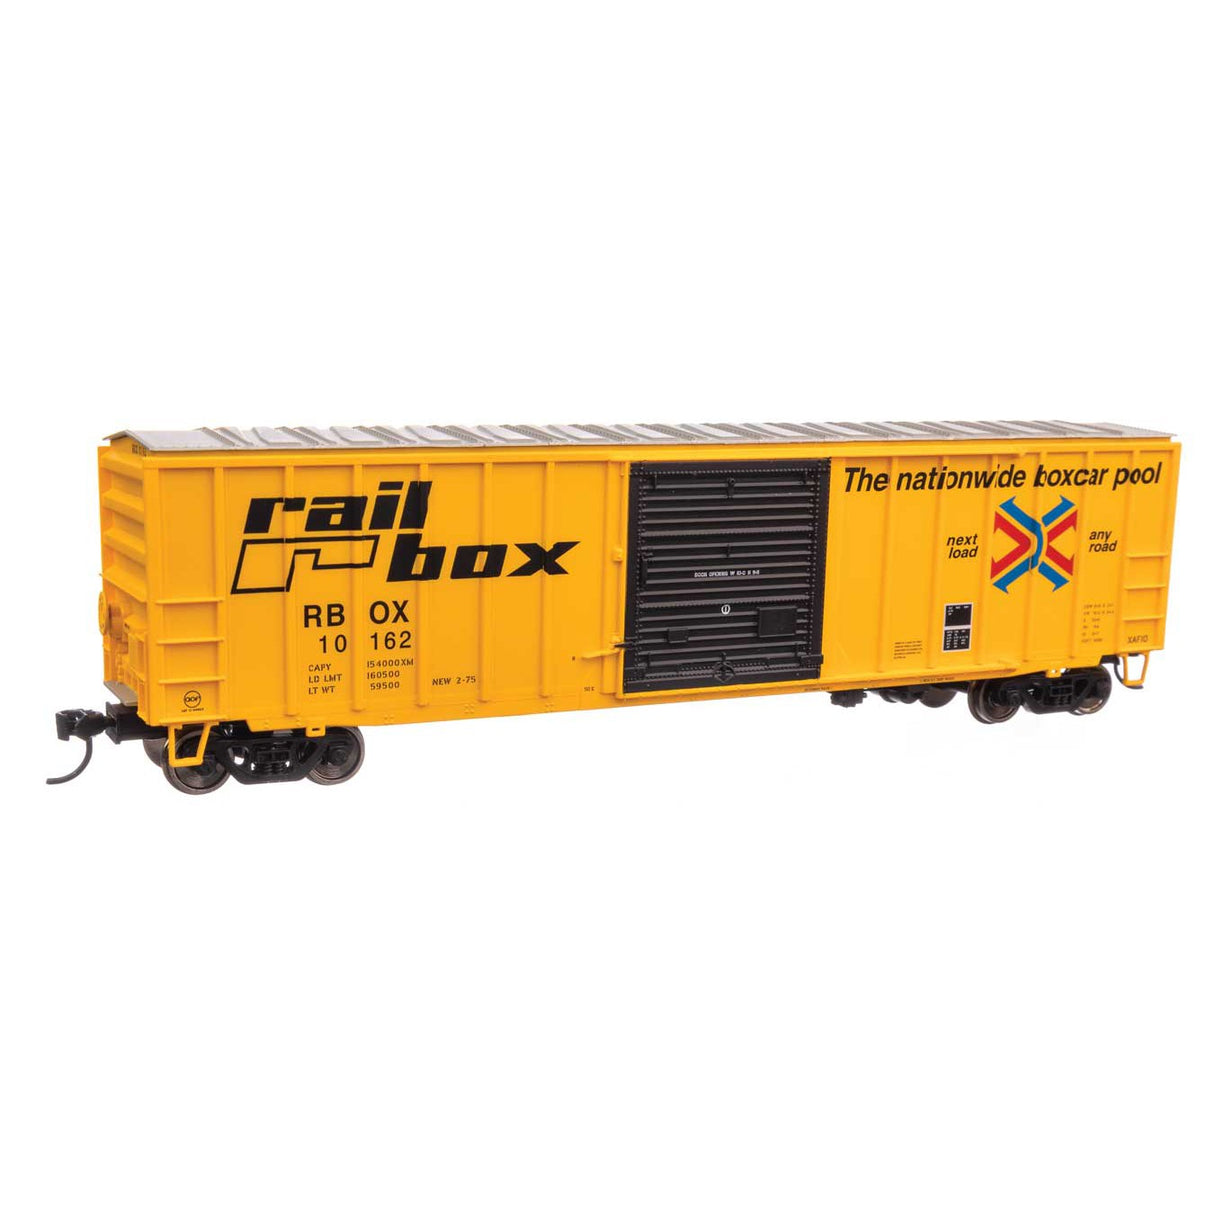 Walthers Mainline HO Scale Railbox RBOX #10162 50' ACF Exterior Post Boxcar